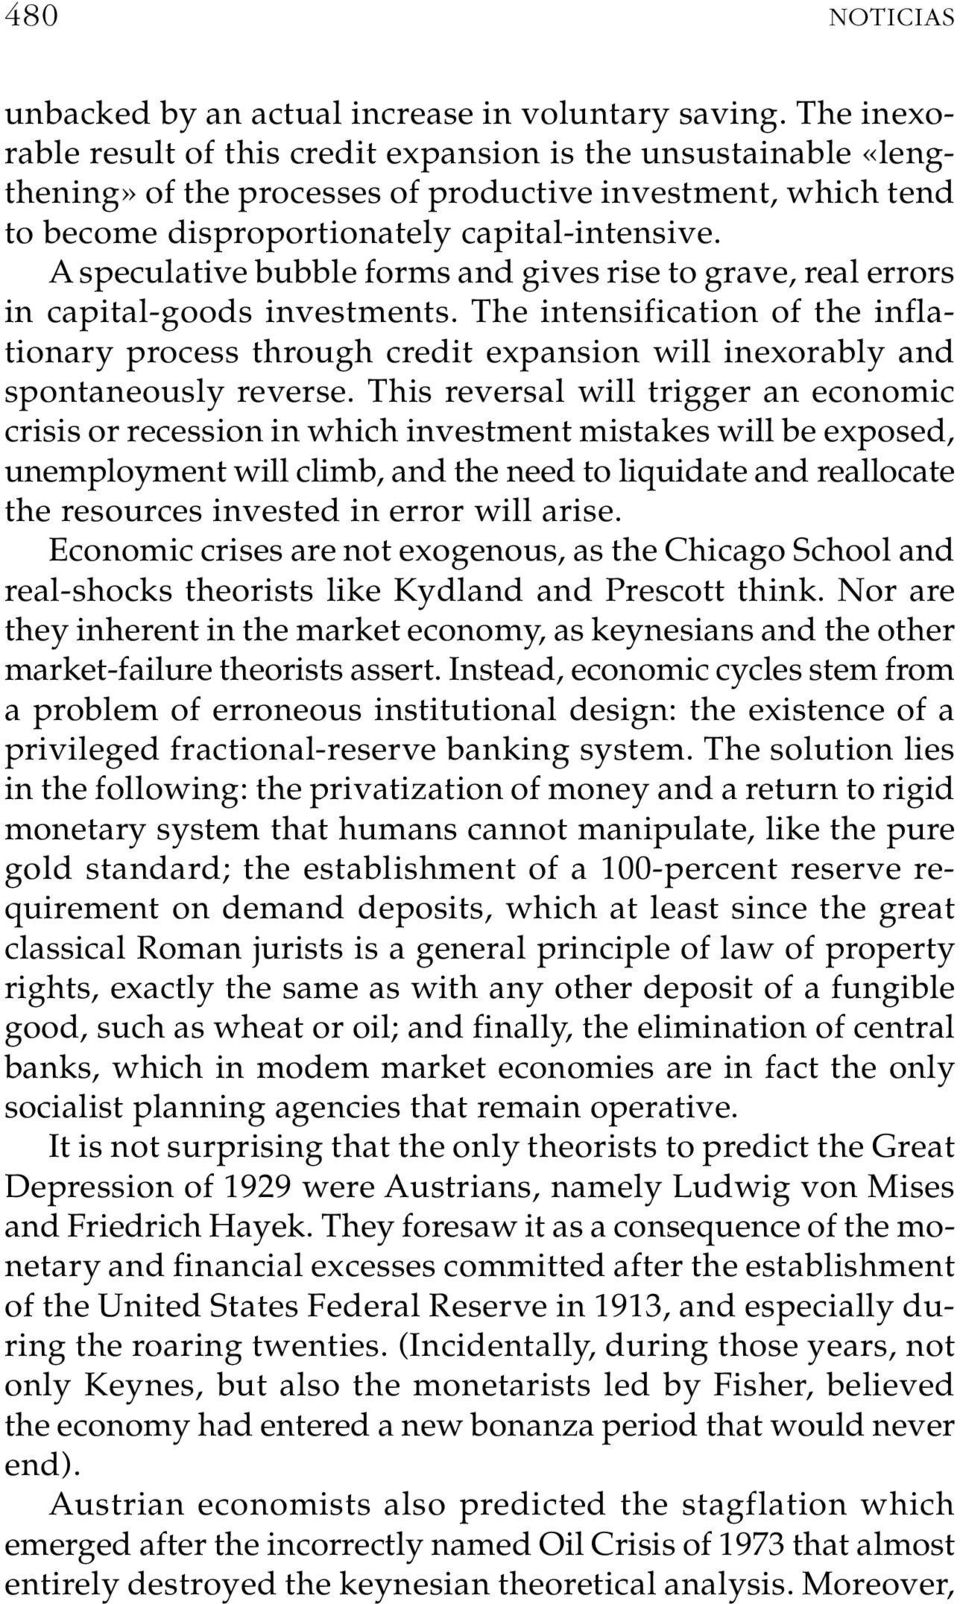 A speculative bubble forms and gives rise to grave, real errors in capital-goods investments.